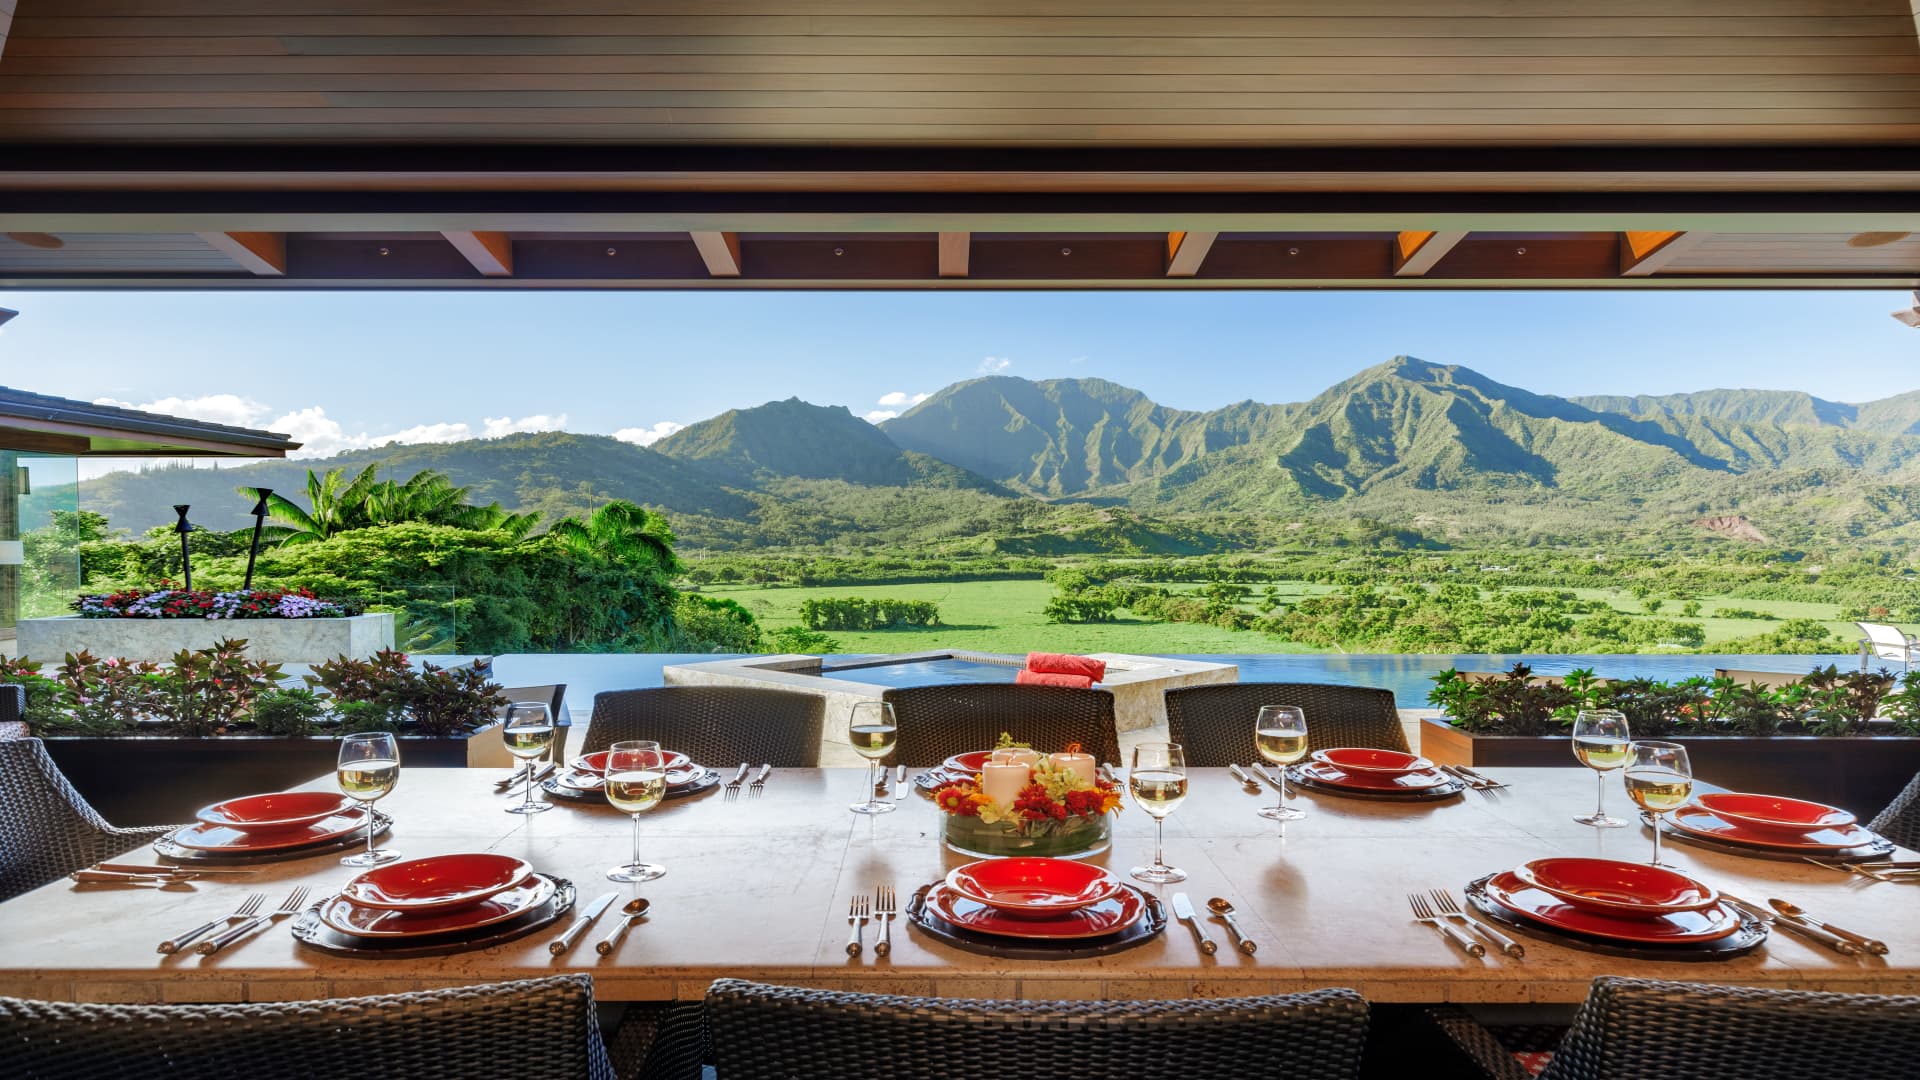 A view of the lanai's dining area.